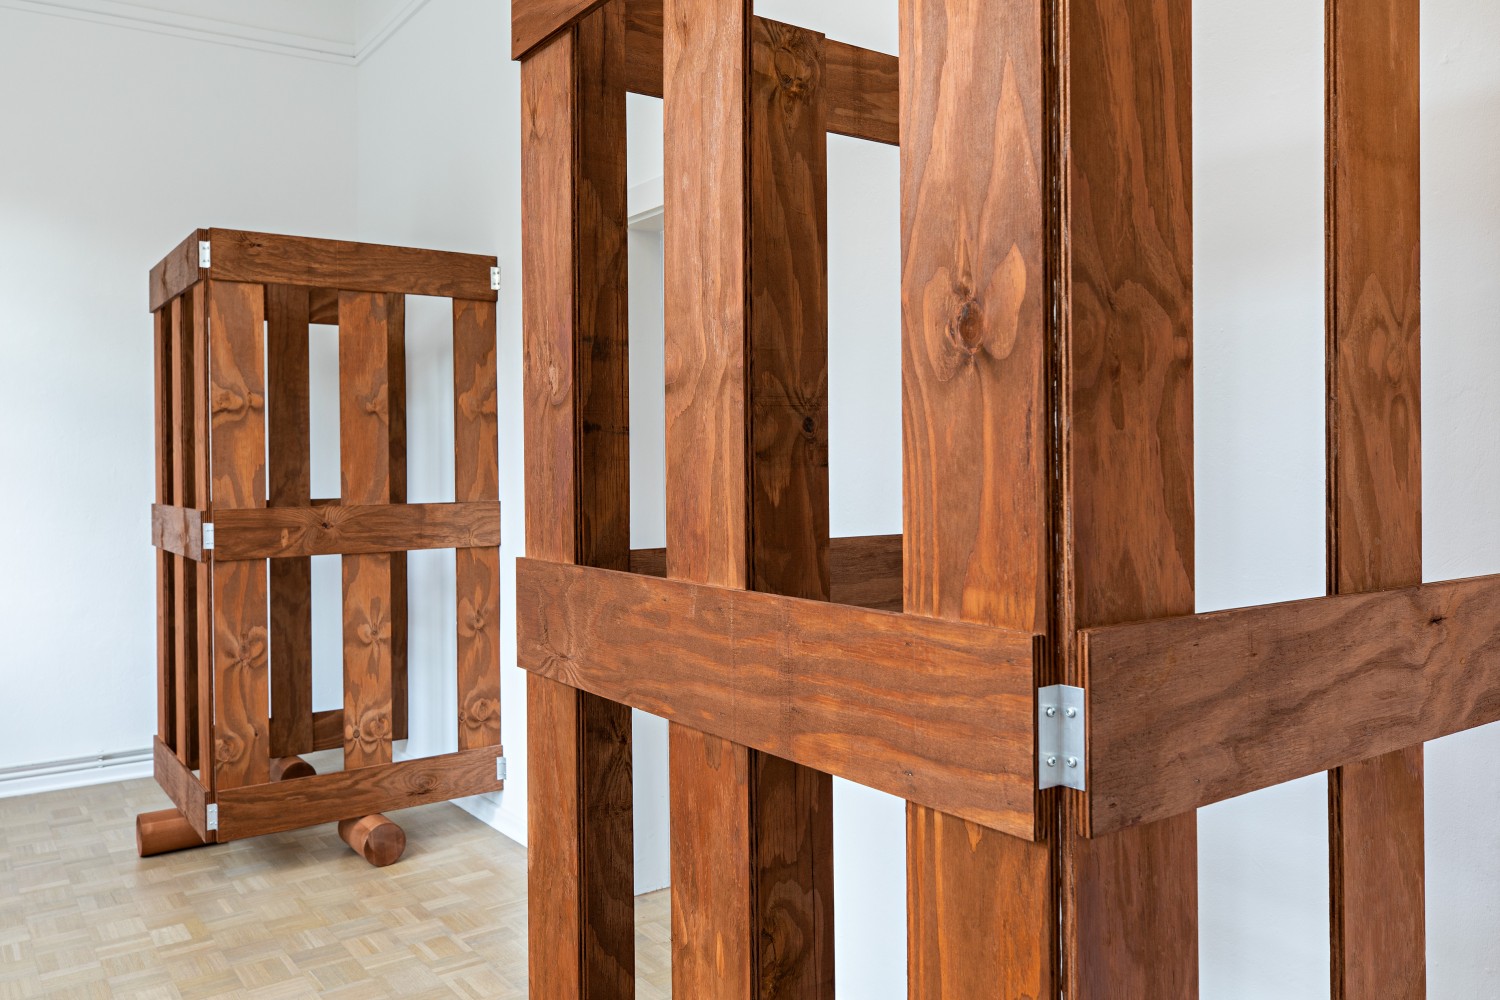 The two three-sided wooden gates on rollers in the small cabinet room look much more massive than the same gates in the larger otherwise empty exhibition rooms.  The close-up shows that the artist has placed the hinges that hold the gates together on the outside, making them visible to the viewer.